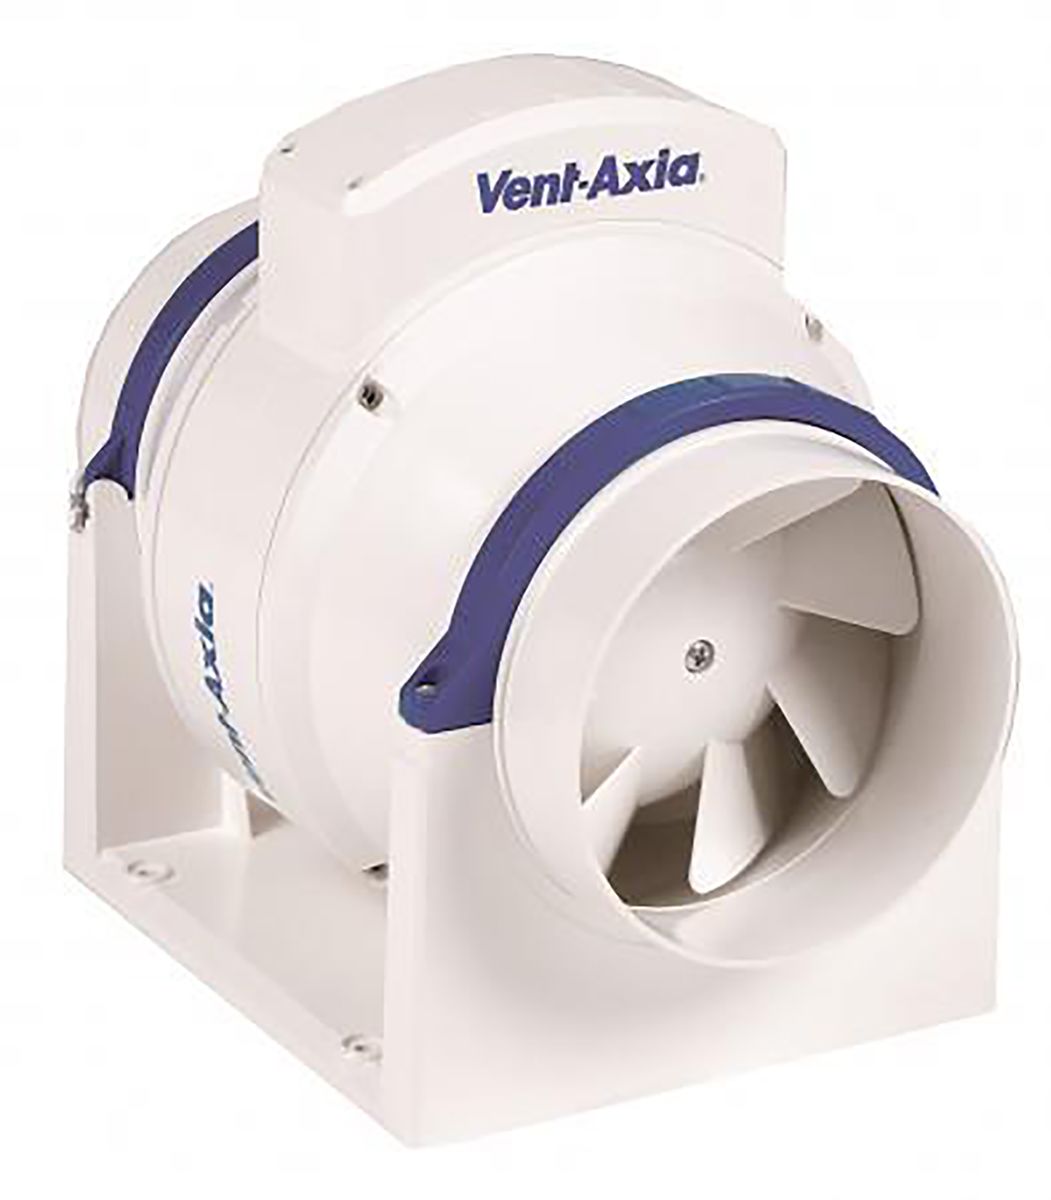 Vent-Axia ACM150T ACM Orbound In Line Extractor Fan, 522m³/h, 35 dB(A)dB(A), Aesthetically Case Style with Wipe Clean